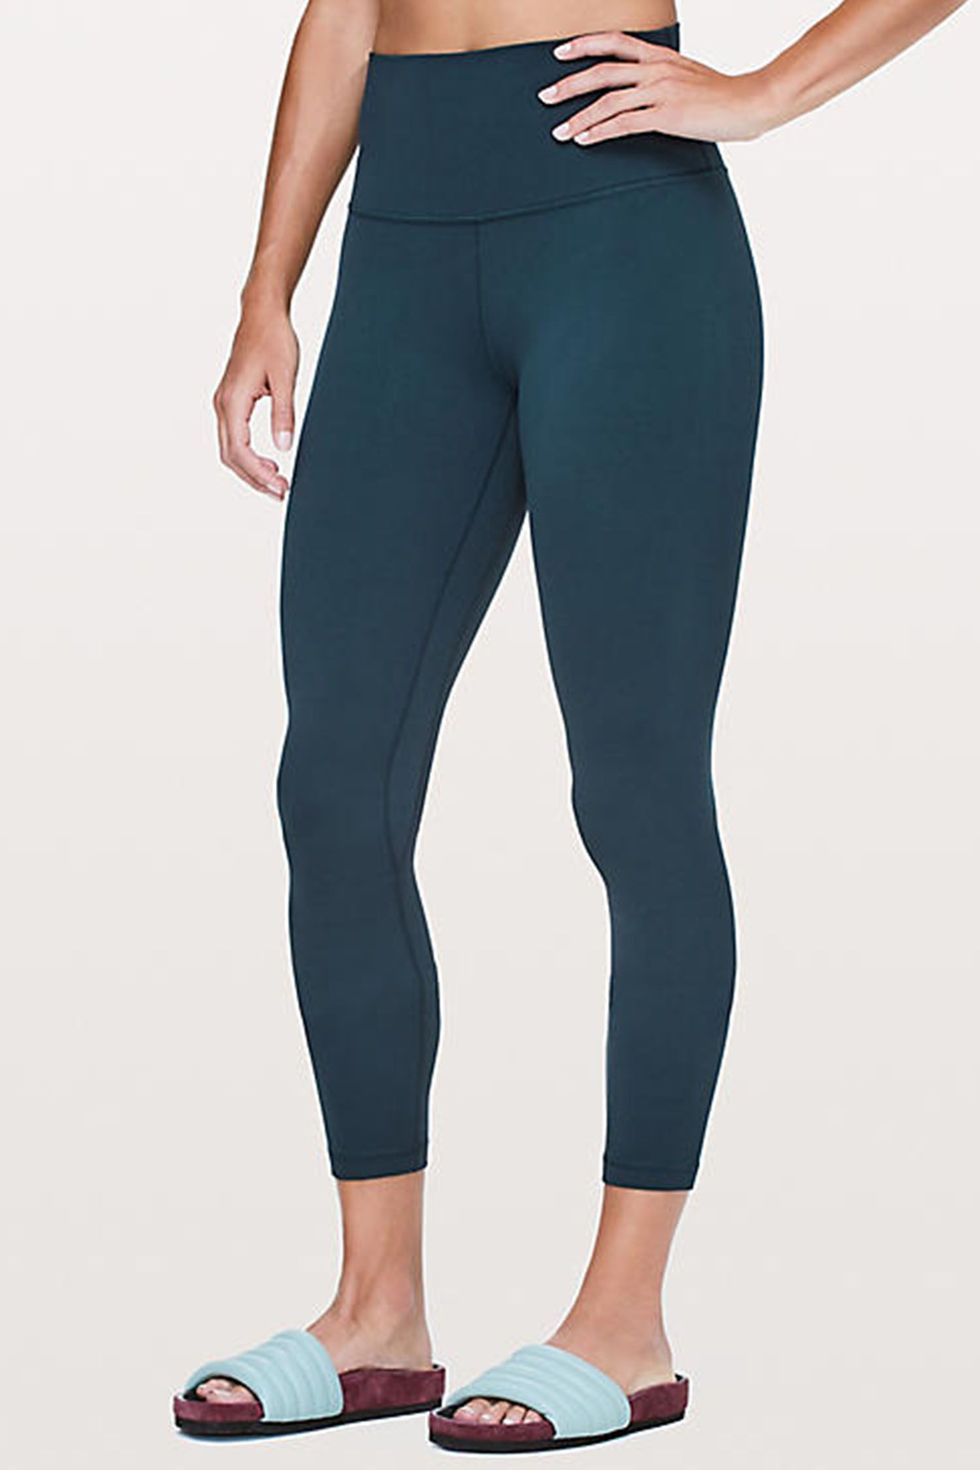 Best 25+ Deals for Booty Yoga Pants